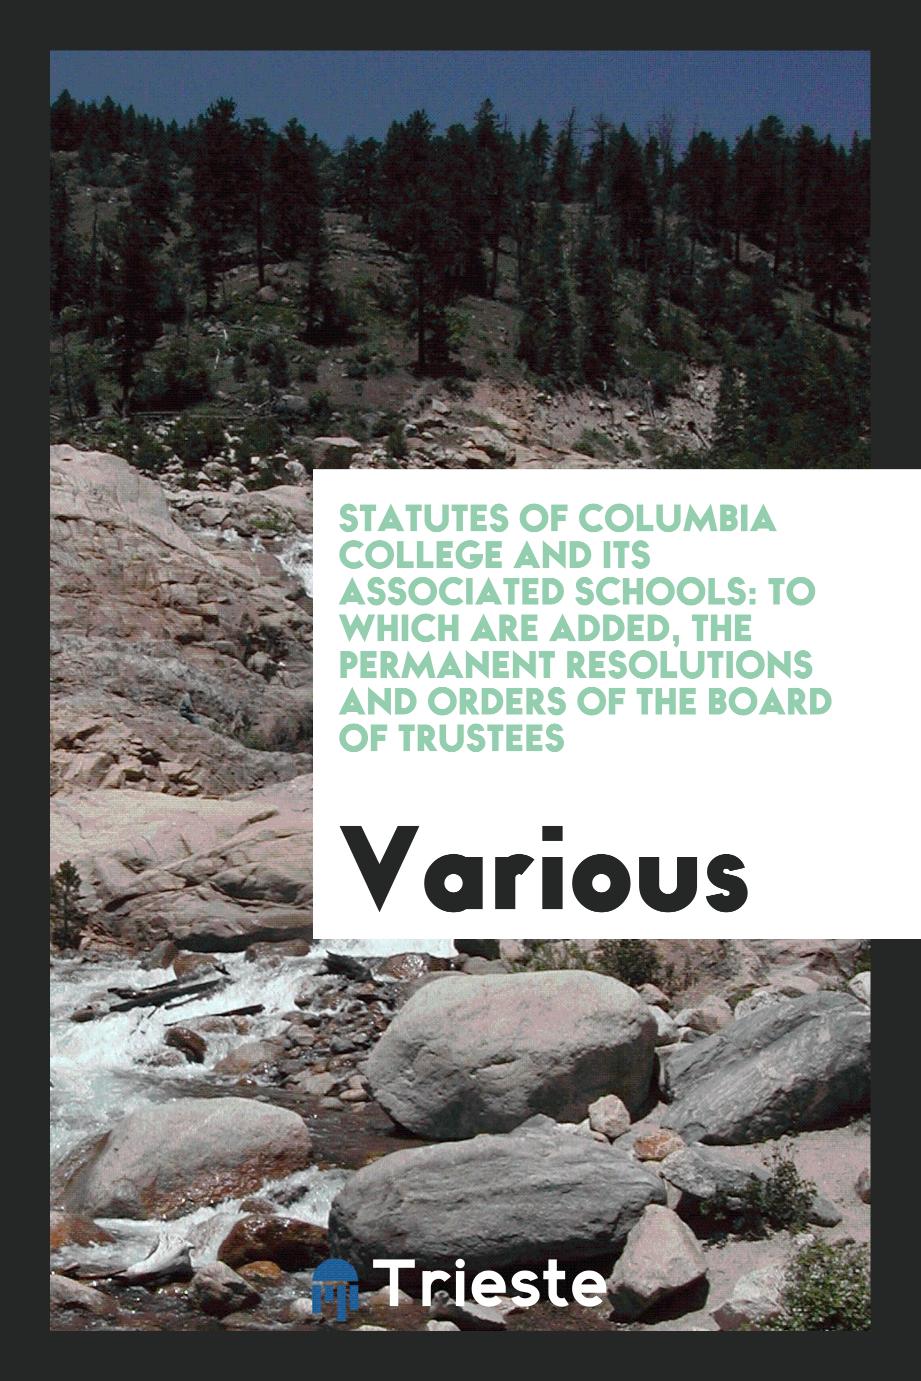 Statutes of Columbia College and Its Associated Schools: to which are added, The permanent resolutions and Orders of the board of trustees